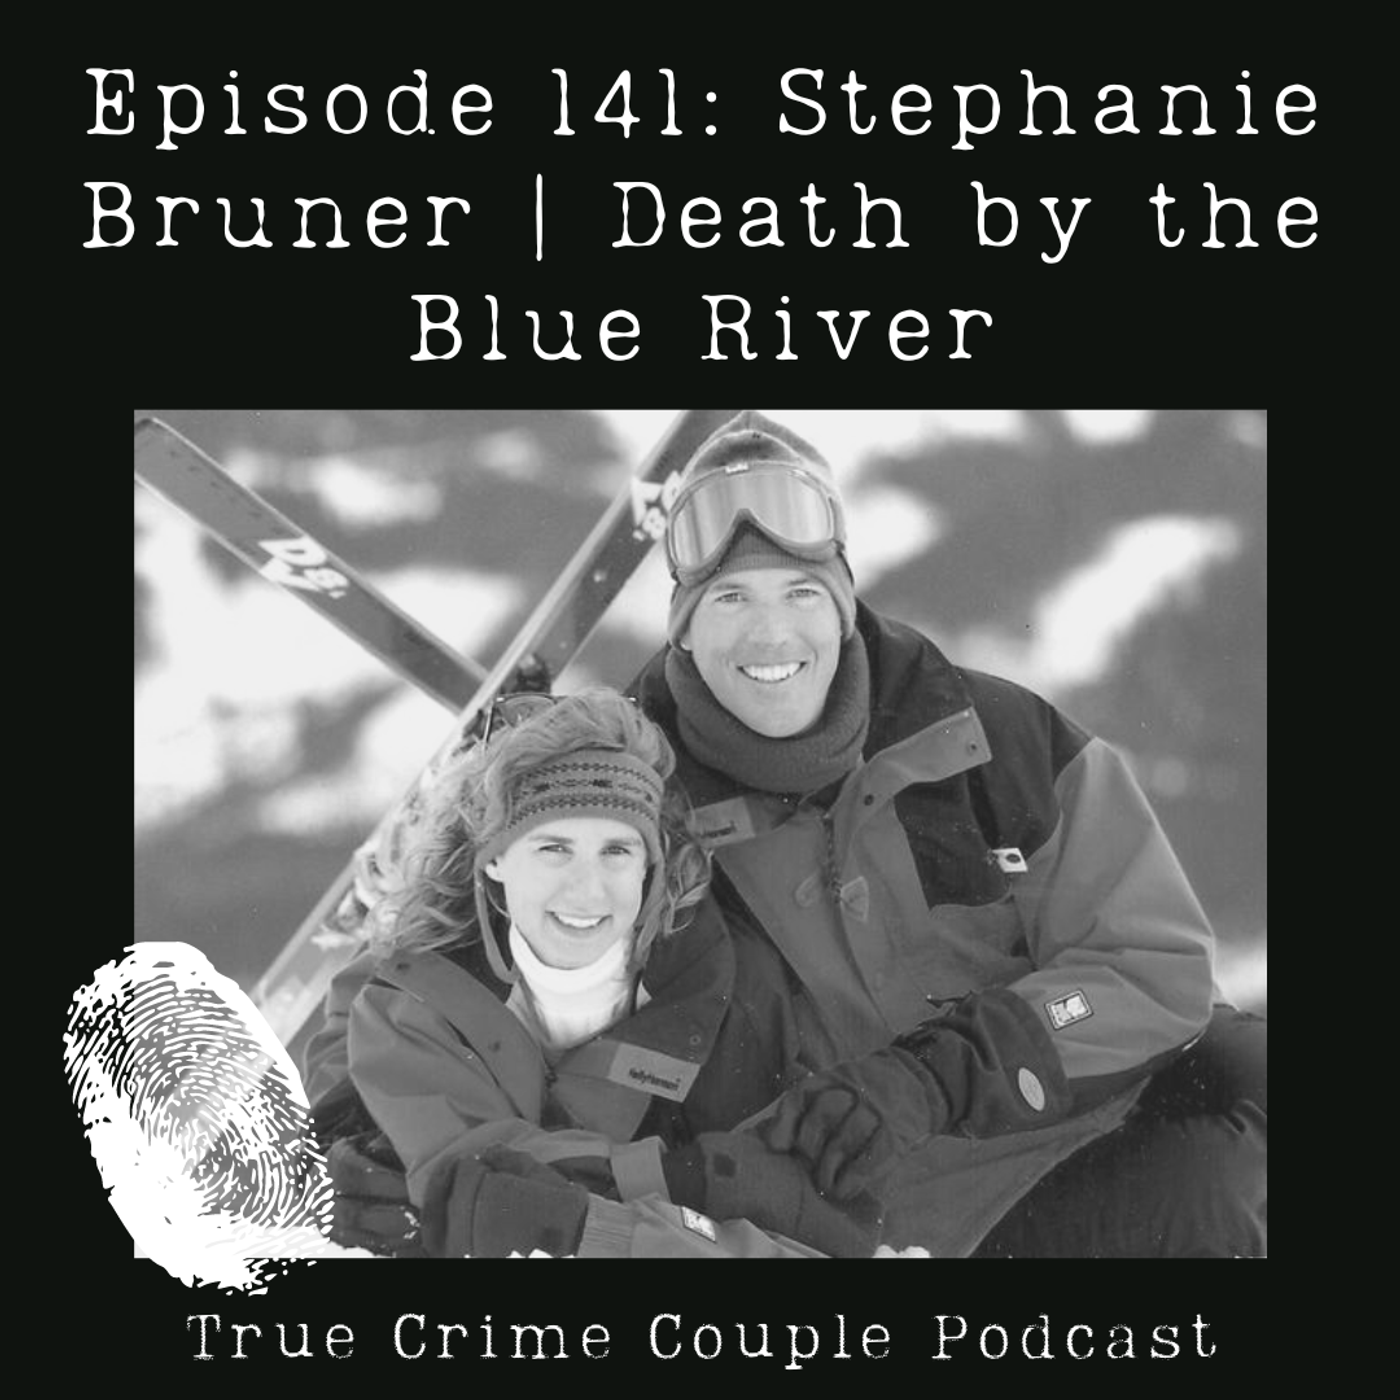 Episode 141: Stephanie Bruner | Death by the Blue River